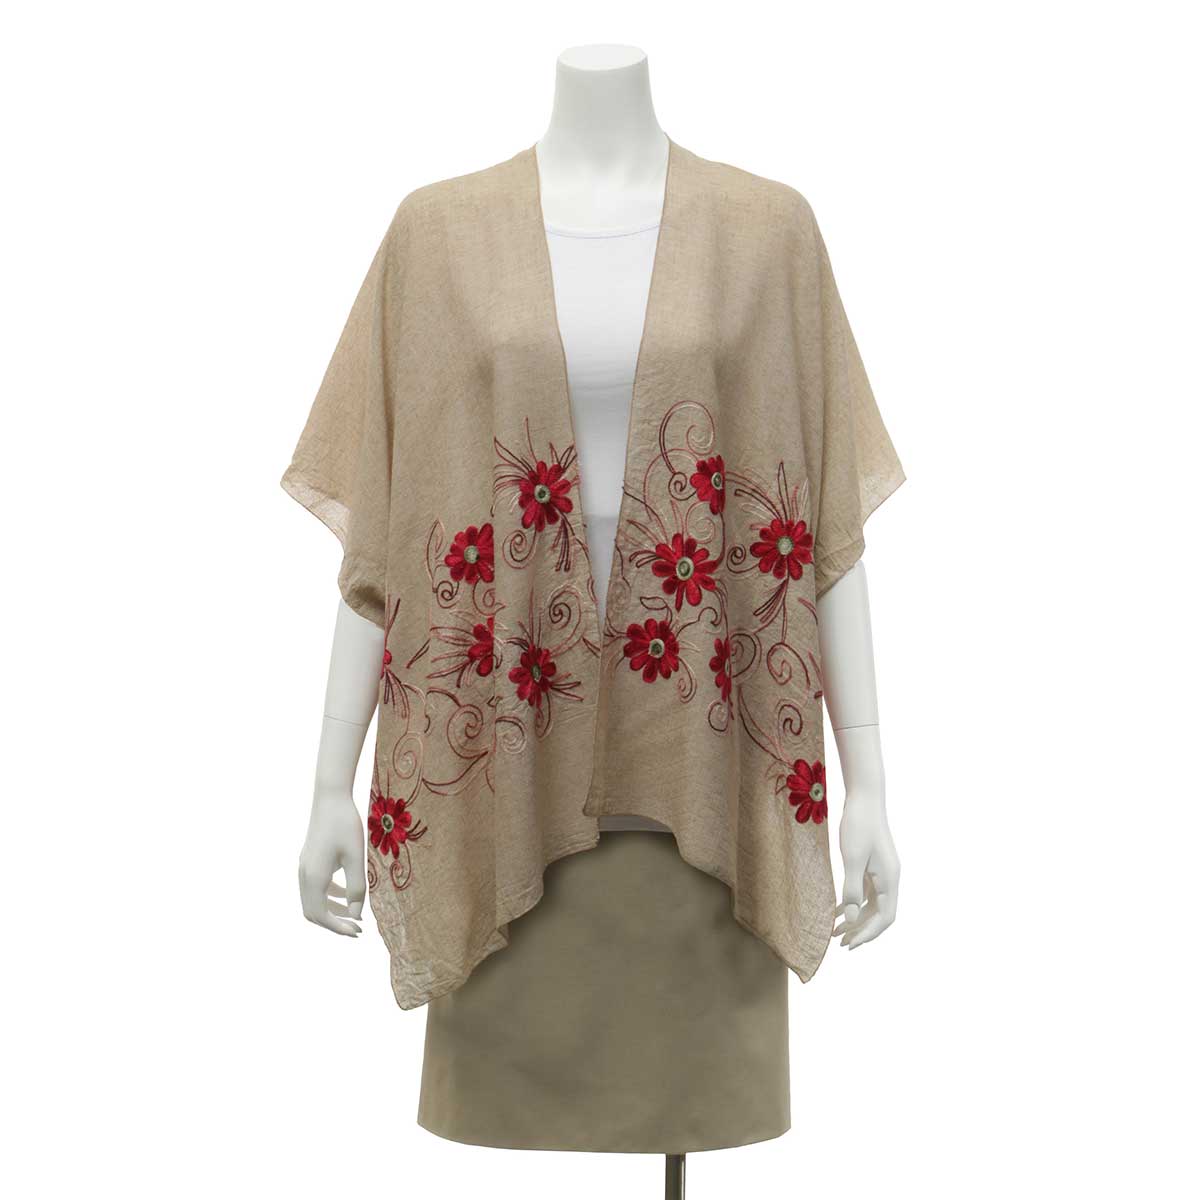 Tan Vest with Red Flowers 34"x28" 50sp